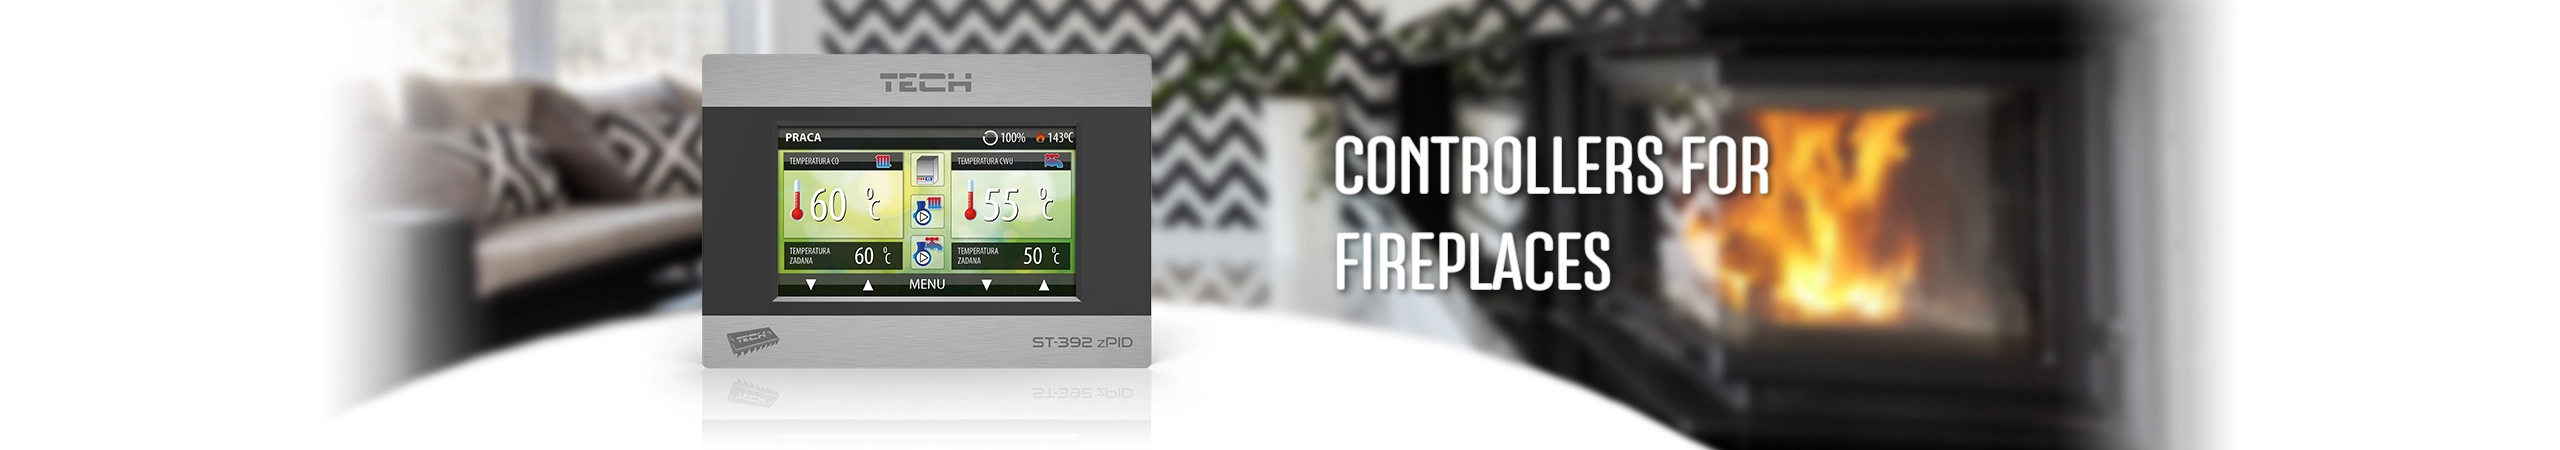 Fireplace controllers - remote thermostat - TECH Sterowniki